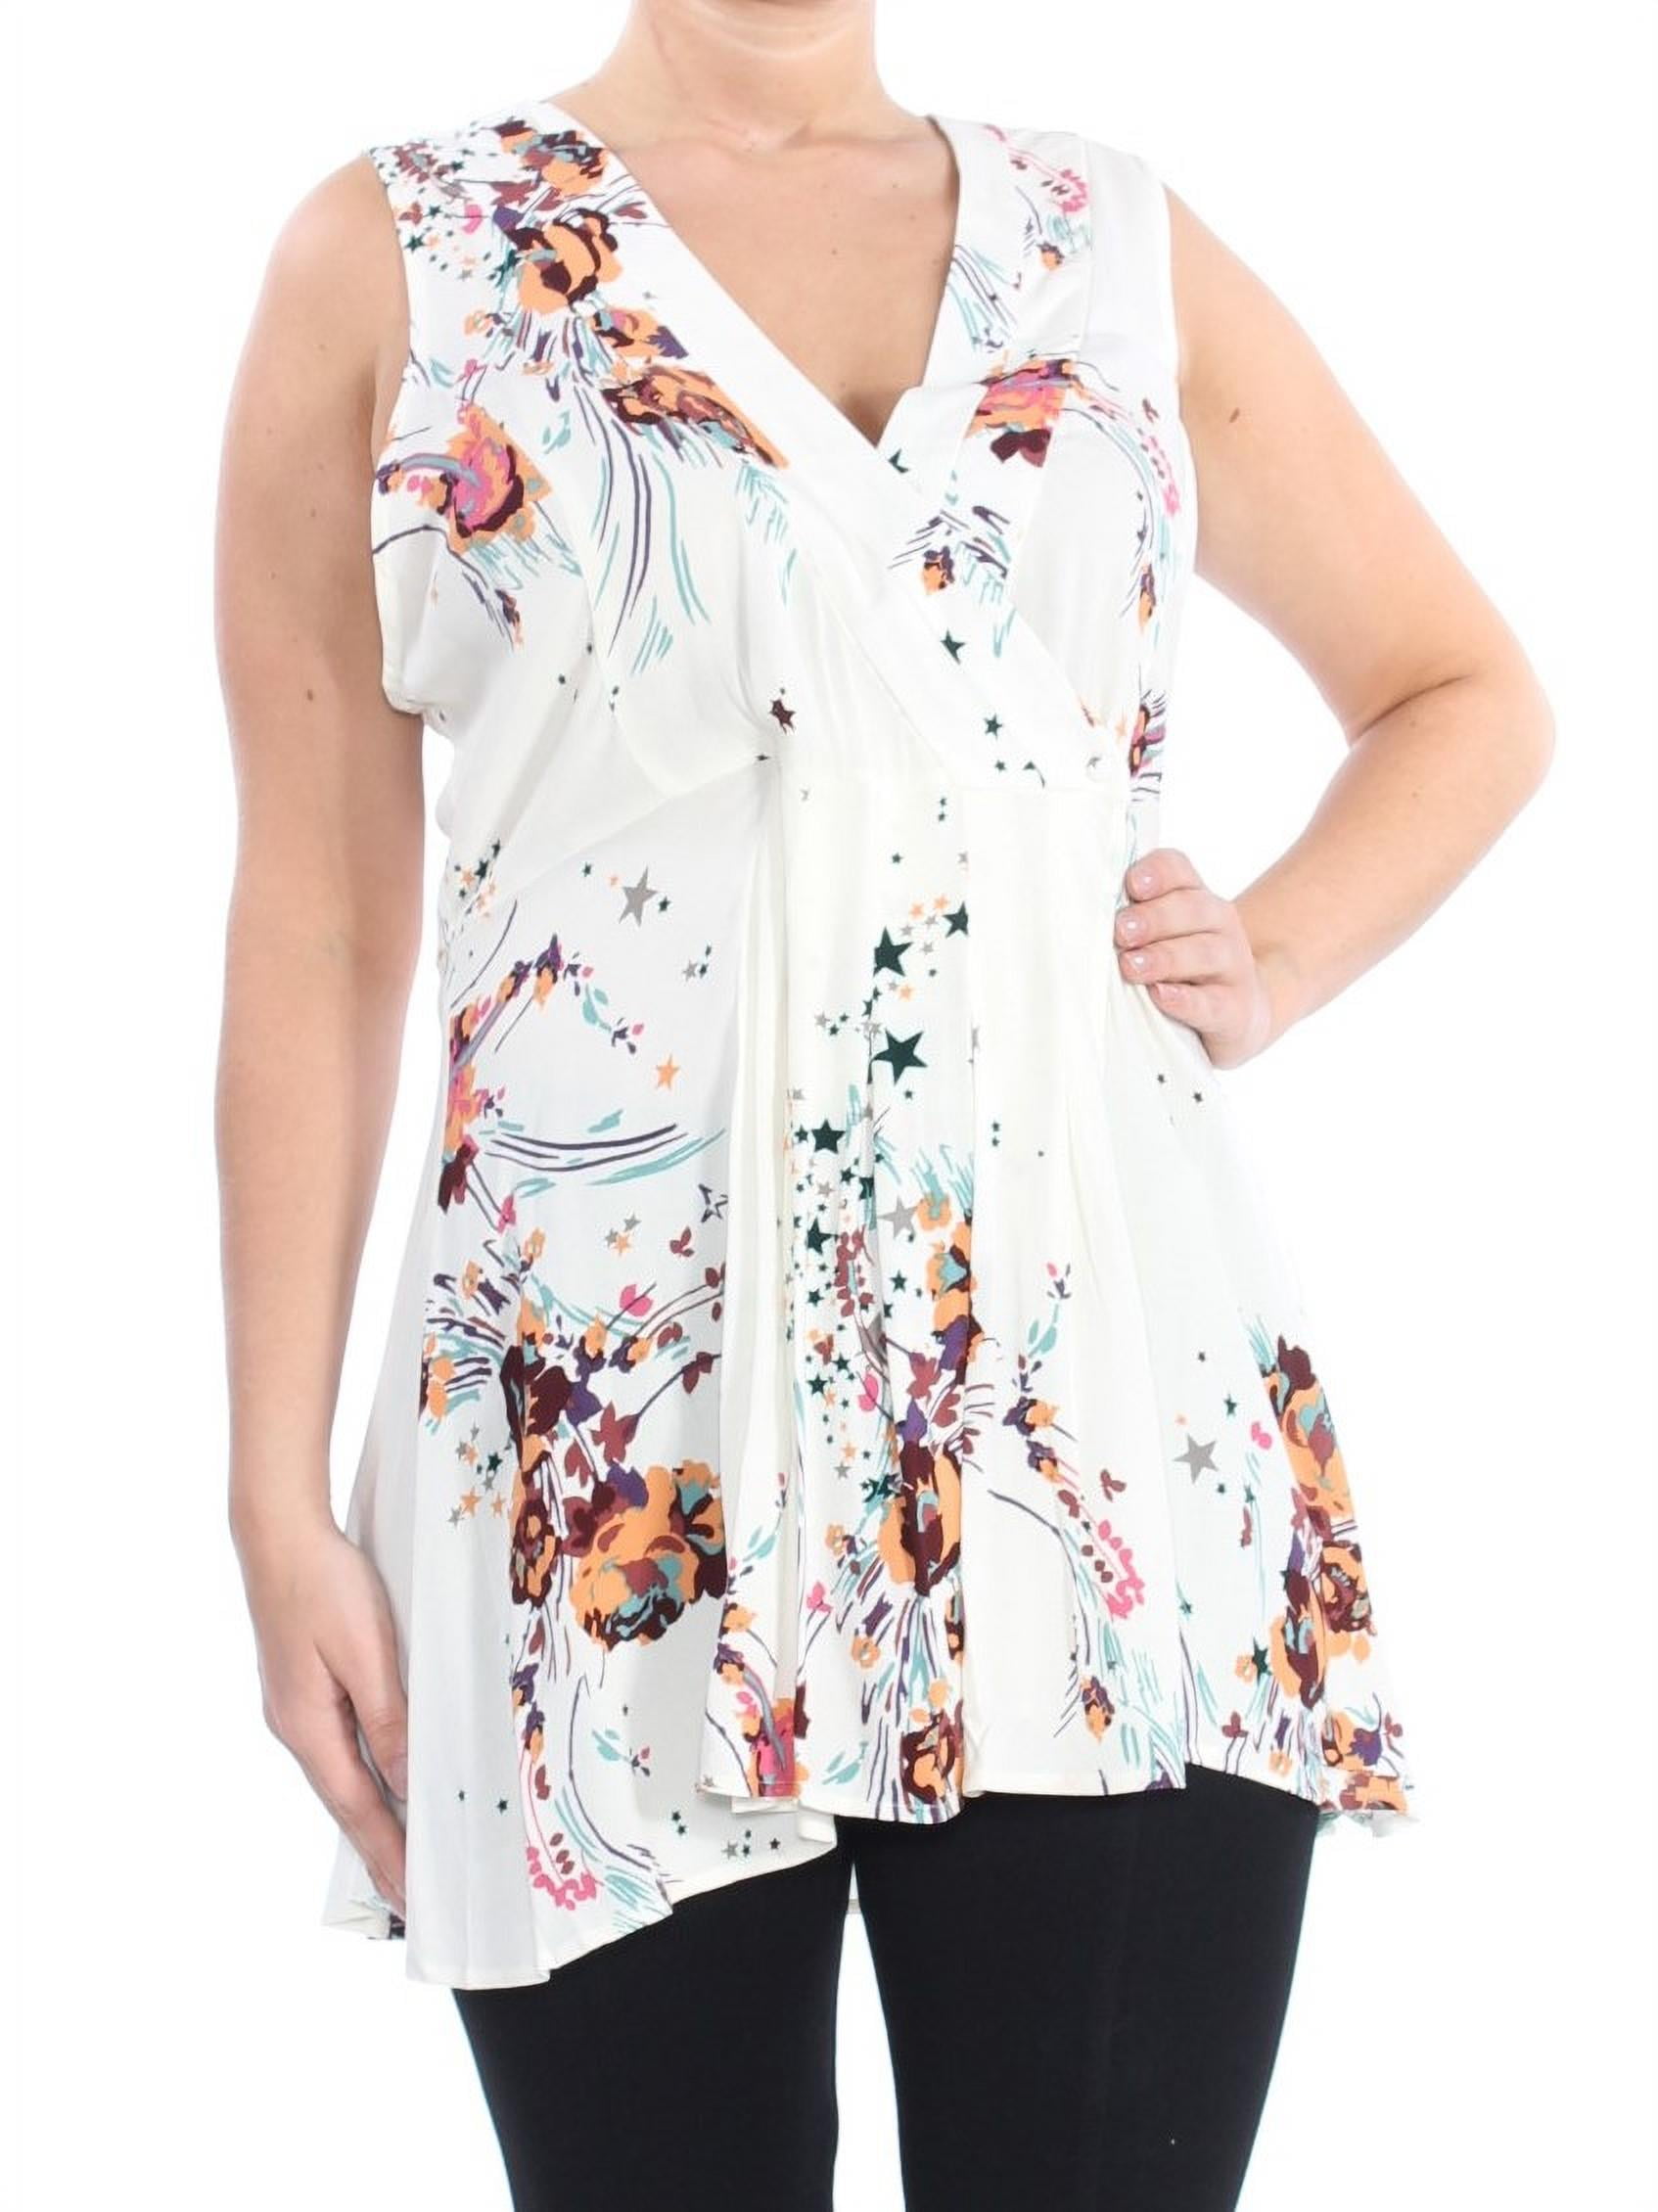 Details about   NWT FREE PEOPLE Womens Floral Blouse Top Small To Medium $98 